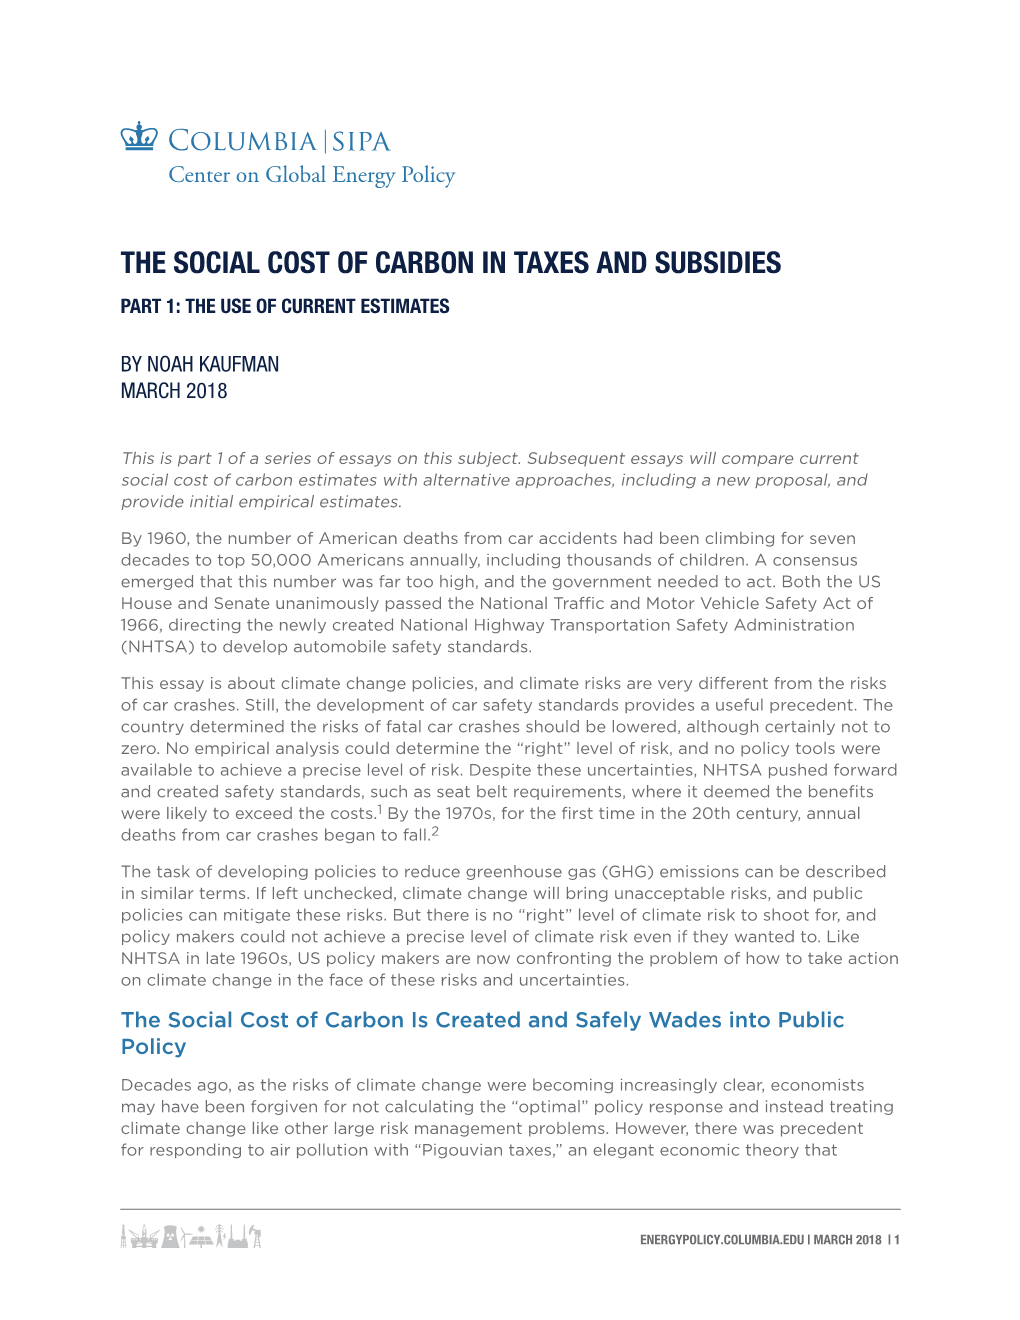 The Social Cost of Carbon in Taxes and Subsidies Part 1: the Use of Current Estimates